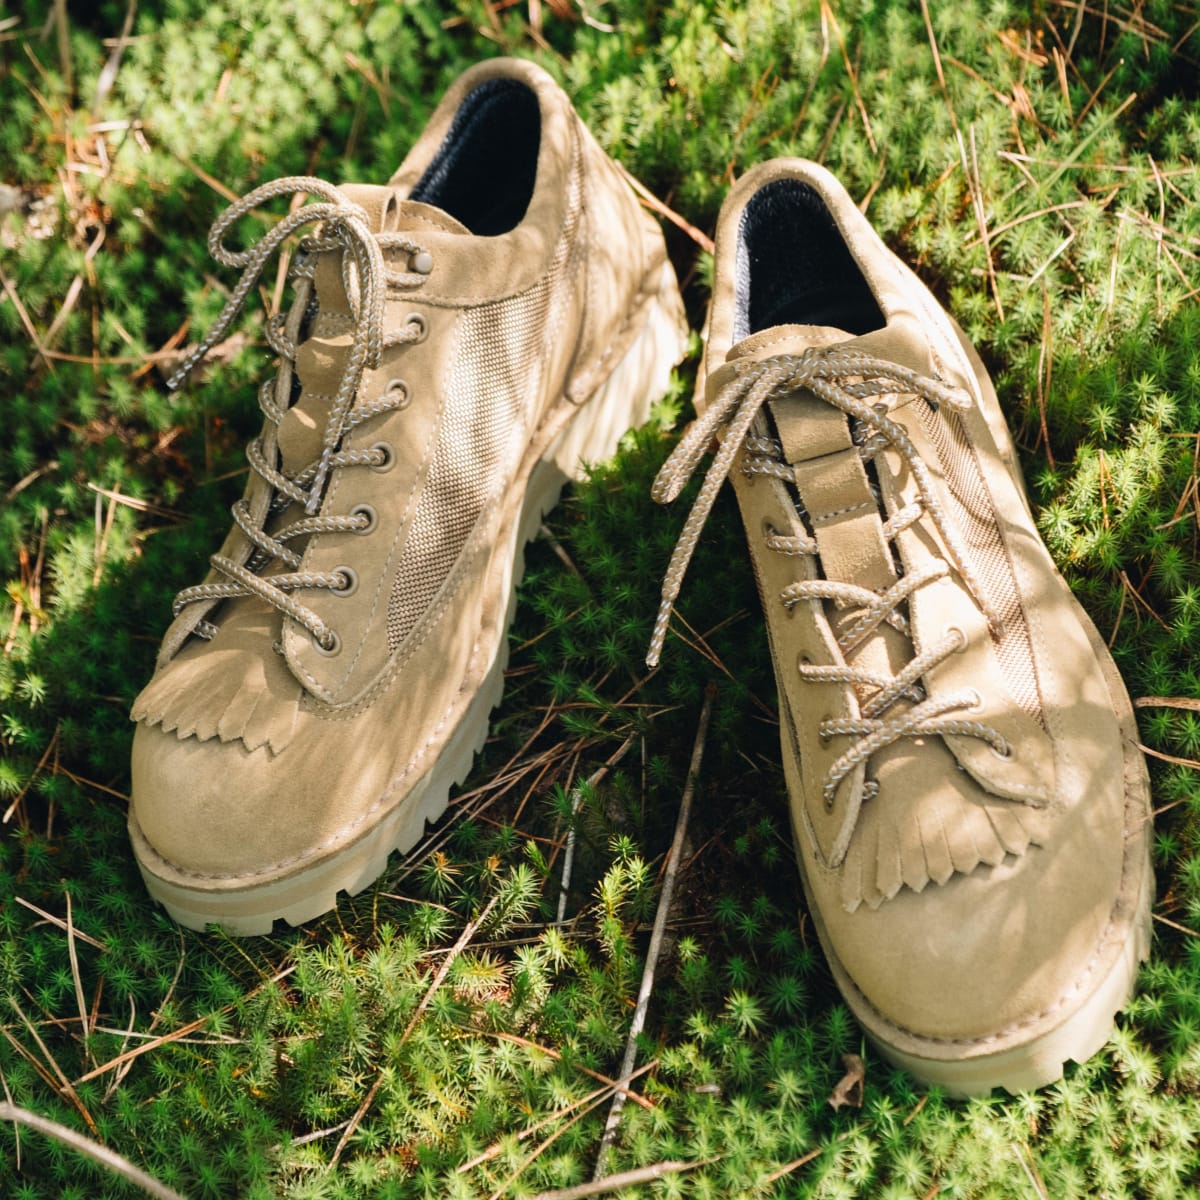 Snow Peak and Danner release their latest collaboration, the Field 